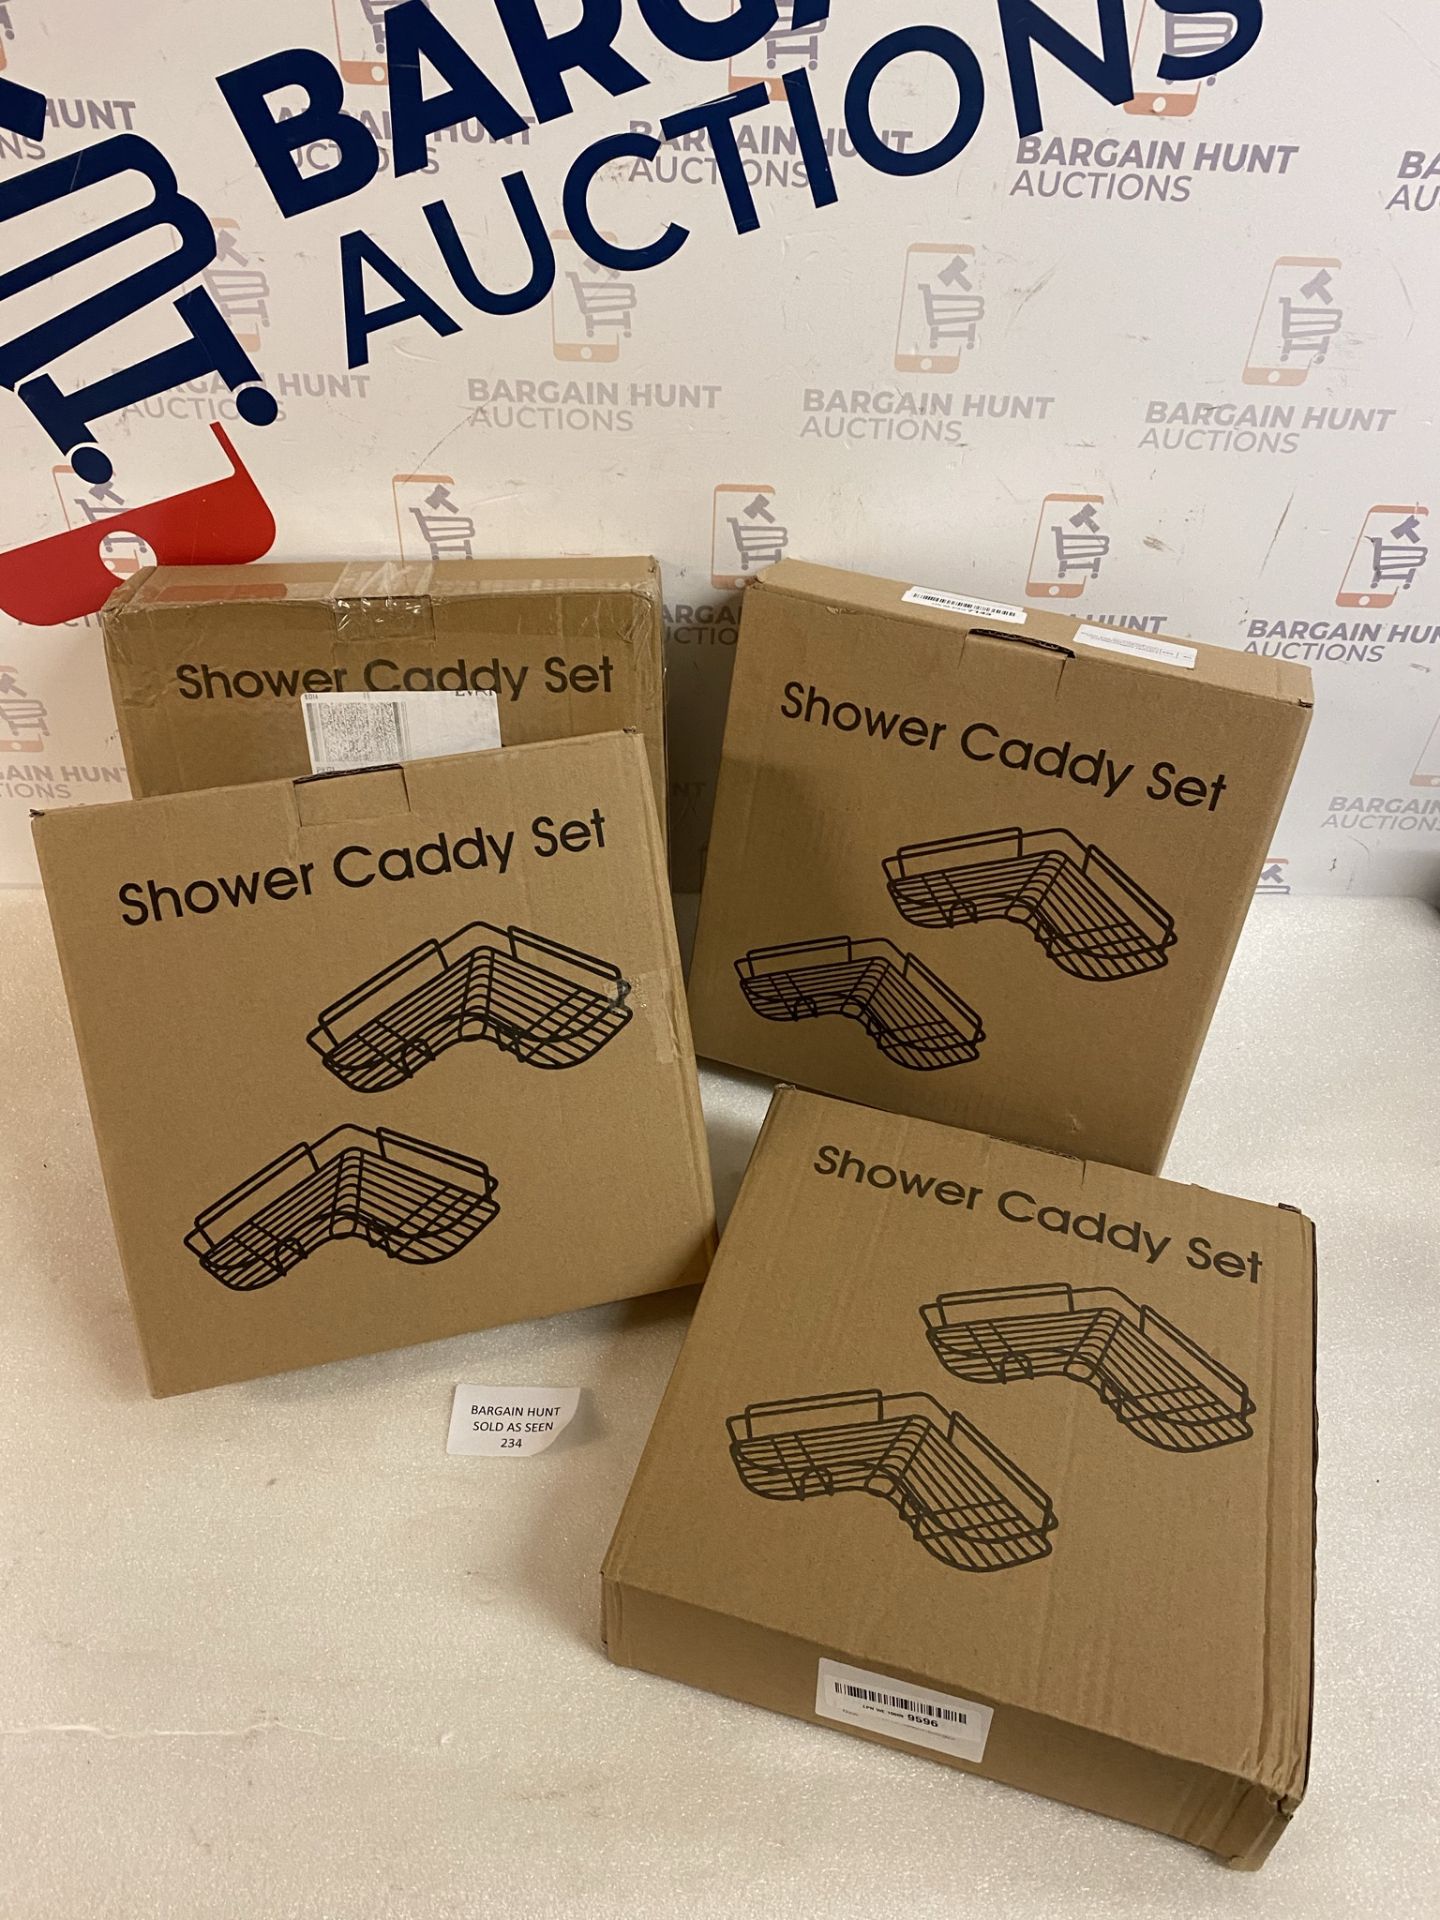 Adoramour Corner Shower Caddy, Set of 4 packs of 2 RRP £60 - Image 2 of 2